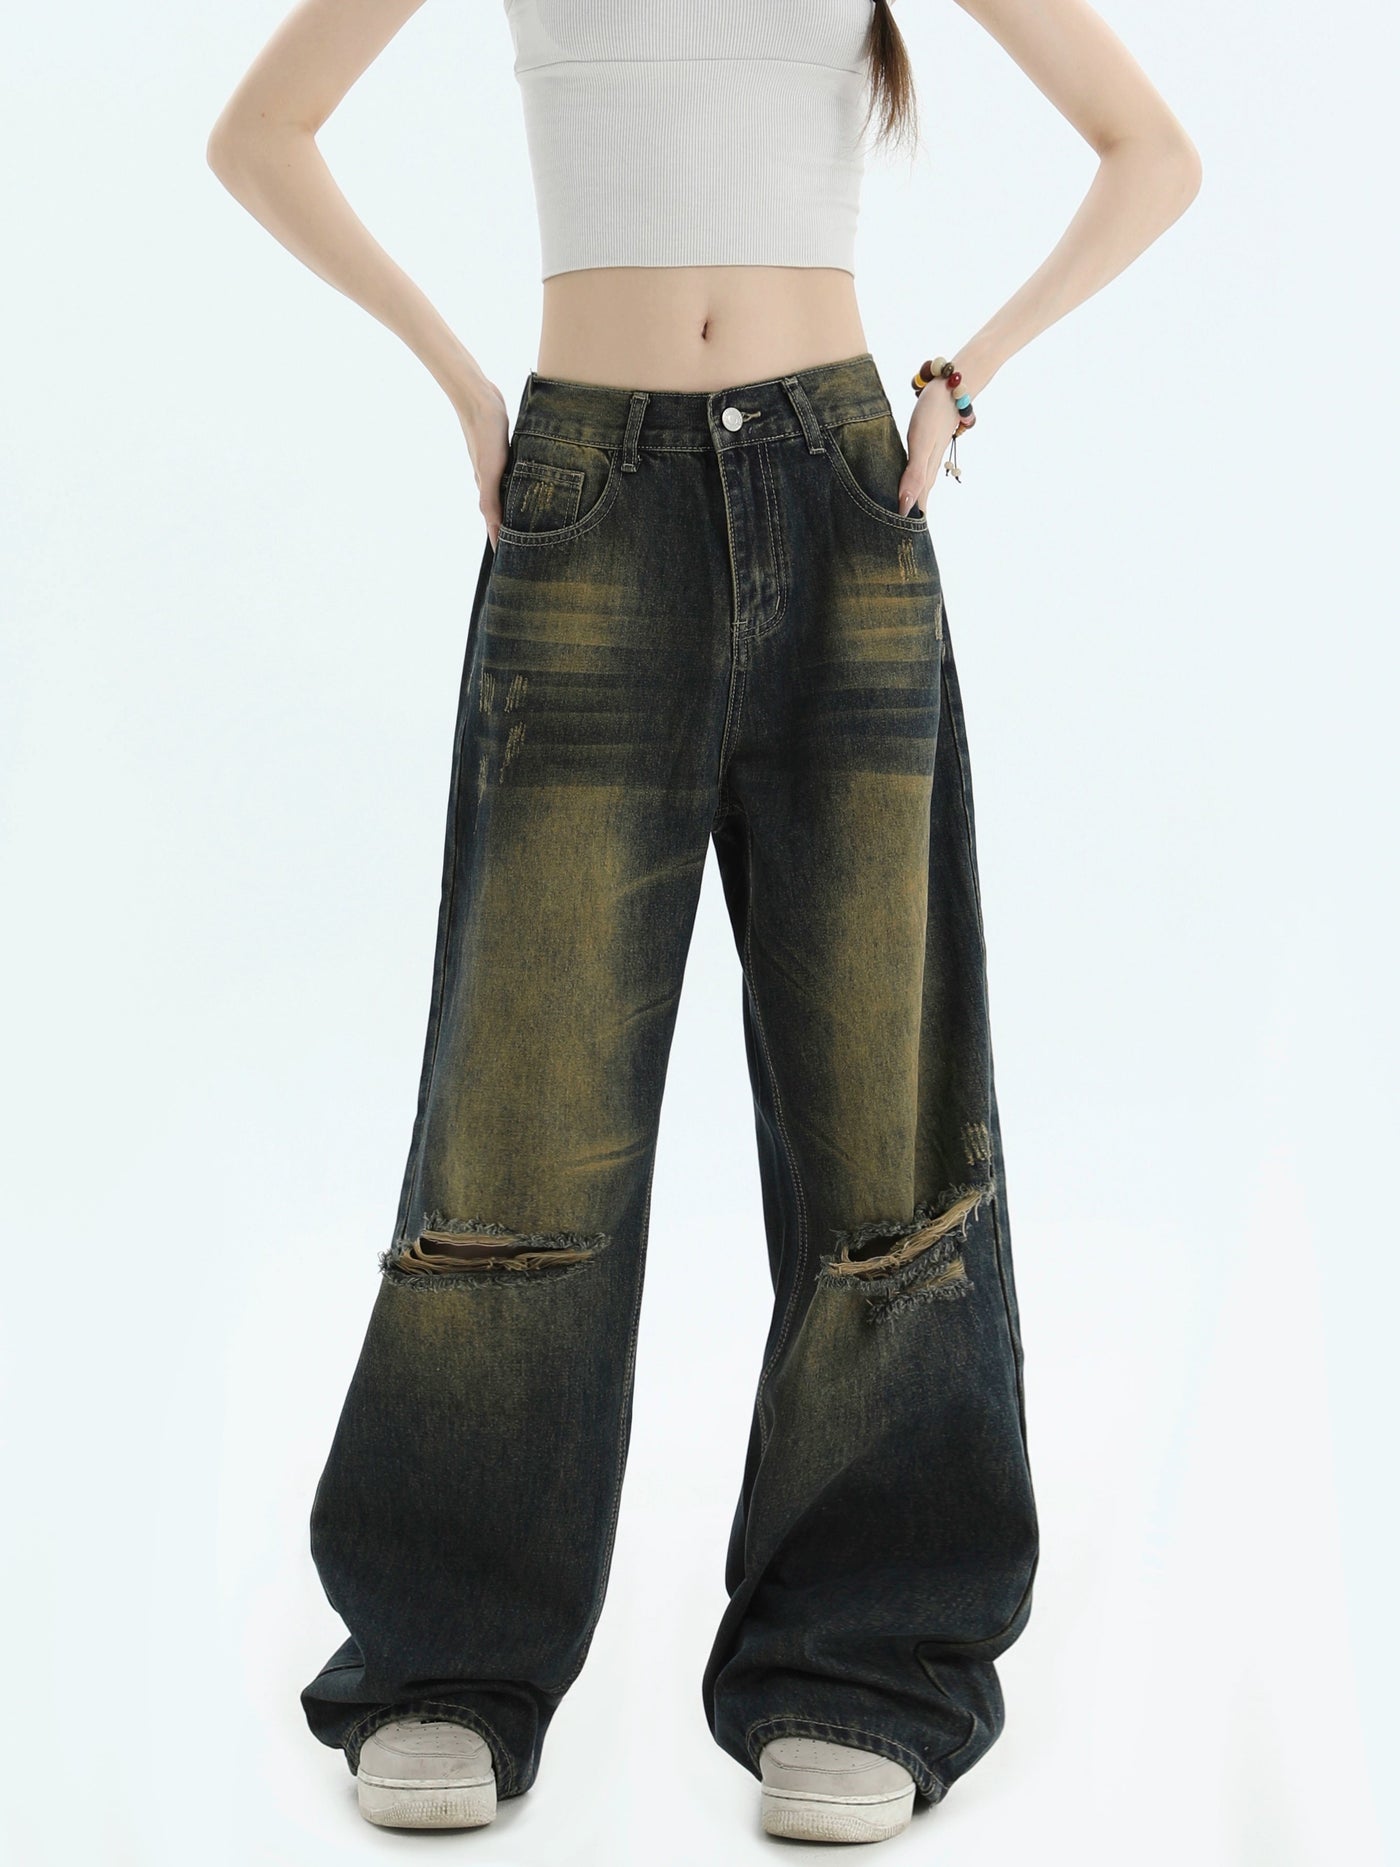 Ripped Knee Yellow Fade Jeans Korean Street Fashion Jeans By INS Korea Shop Online at OH Vault